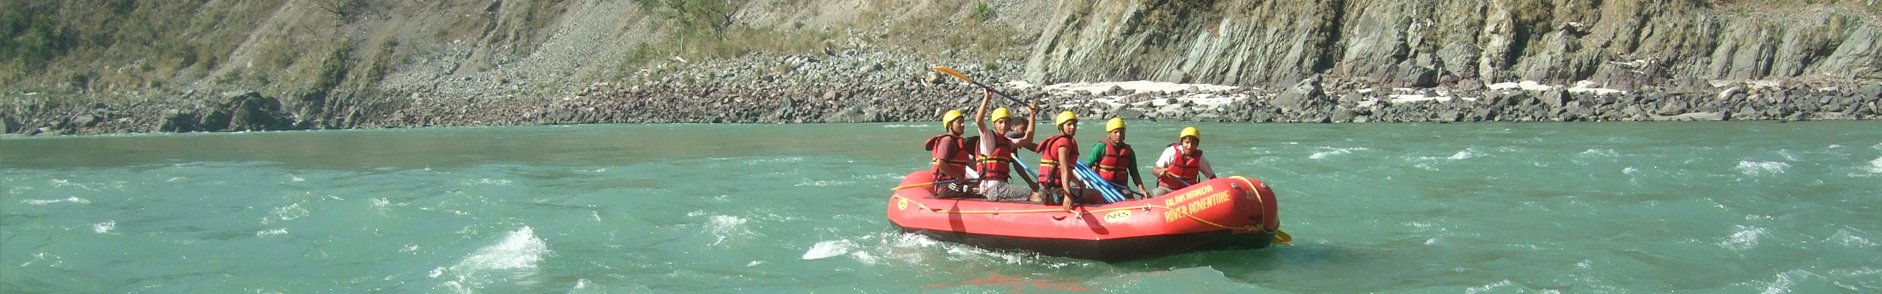 Corporate Packages for River Rafting in Rishikesh